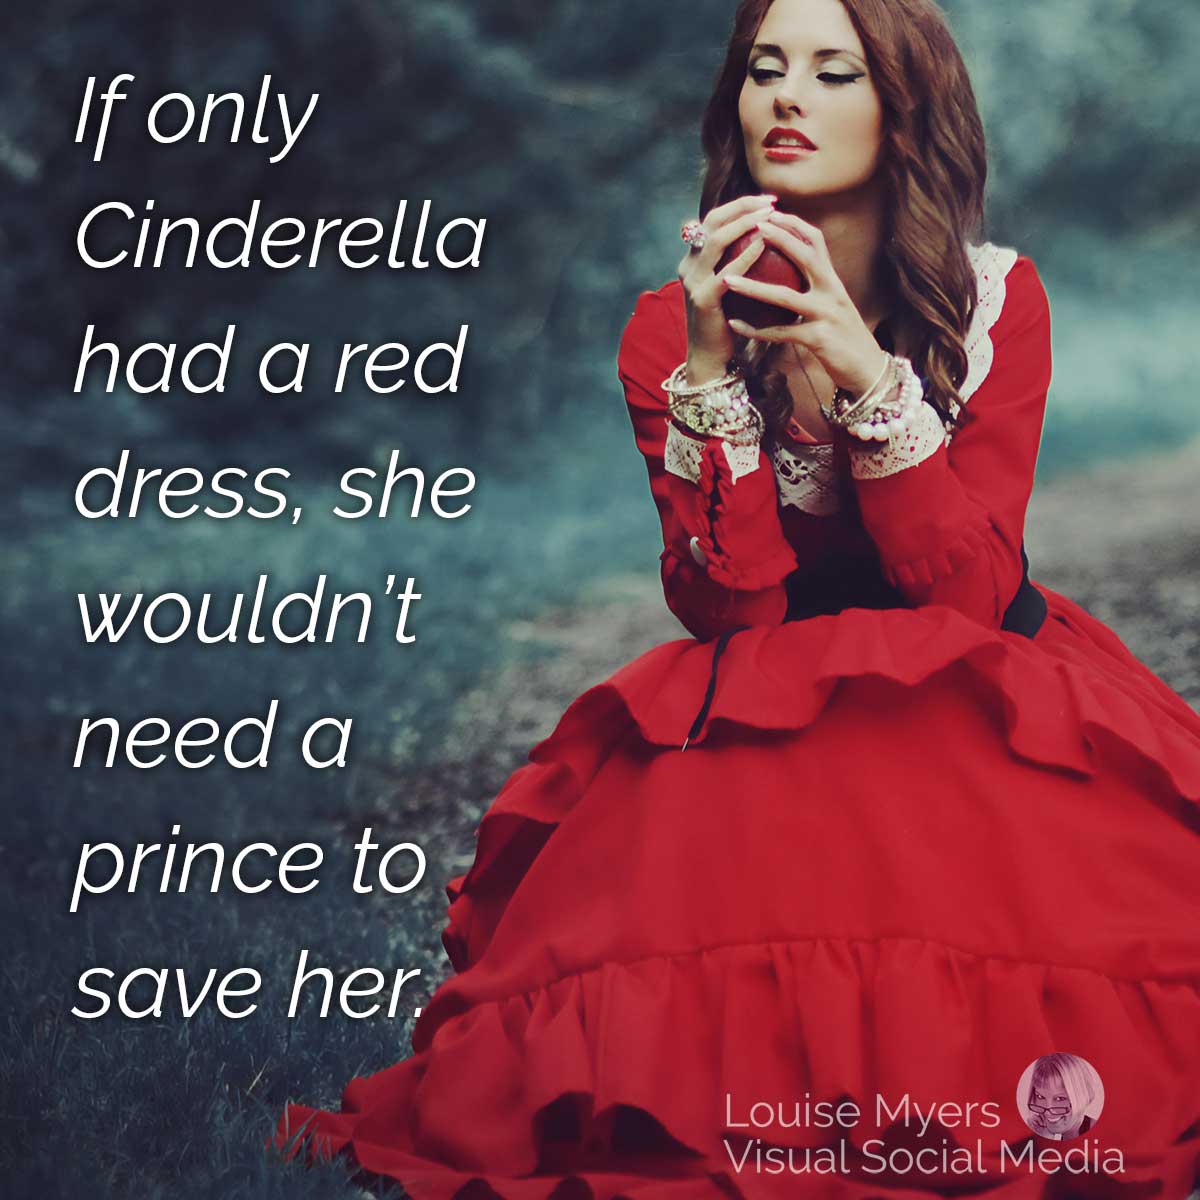 woman in red princess gown with quote, If only Cinderella had a red dress she wouldn't need a prince.